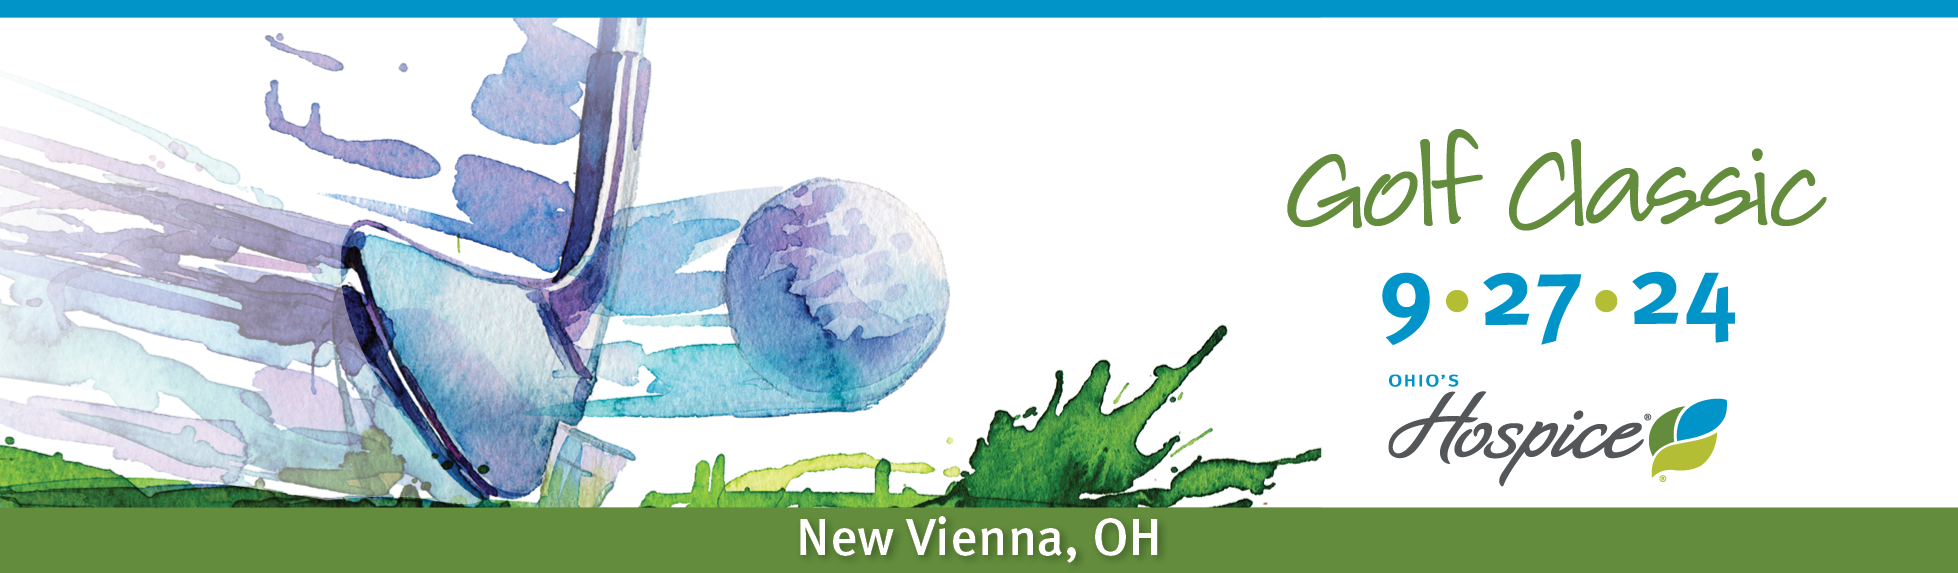 Community Care Hospice 2024 Golf Classic 9.27.24 New Vienna, OH